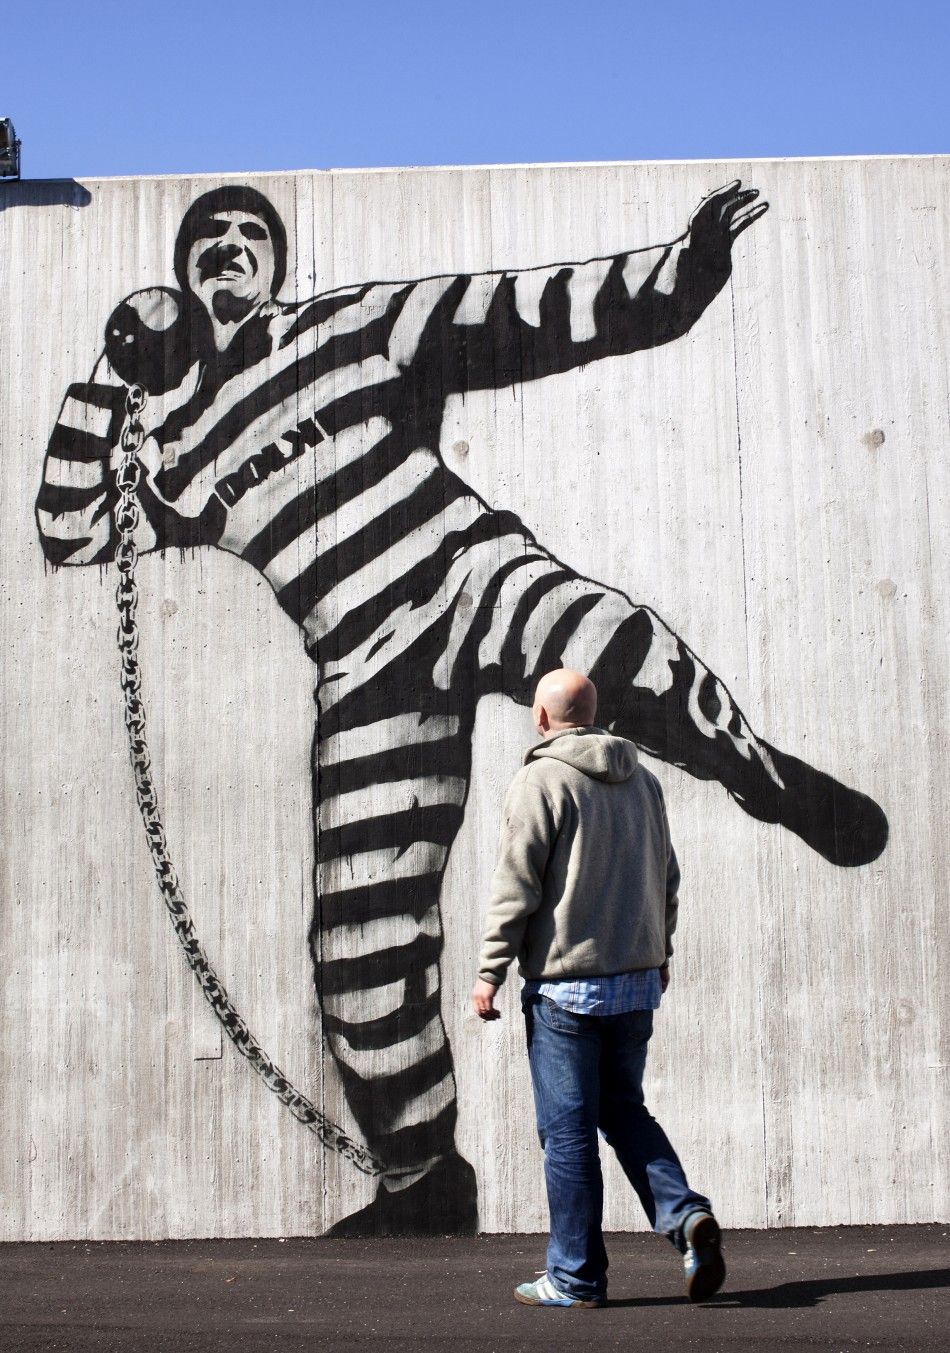 A man walks in front of graffiti inside Halden prison in the far southeast of Norway in this picture taken in 2010